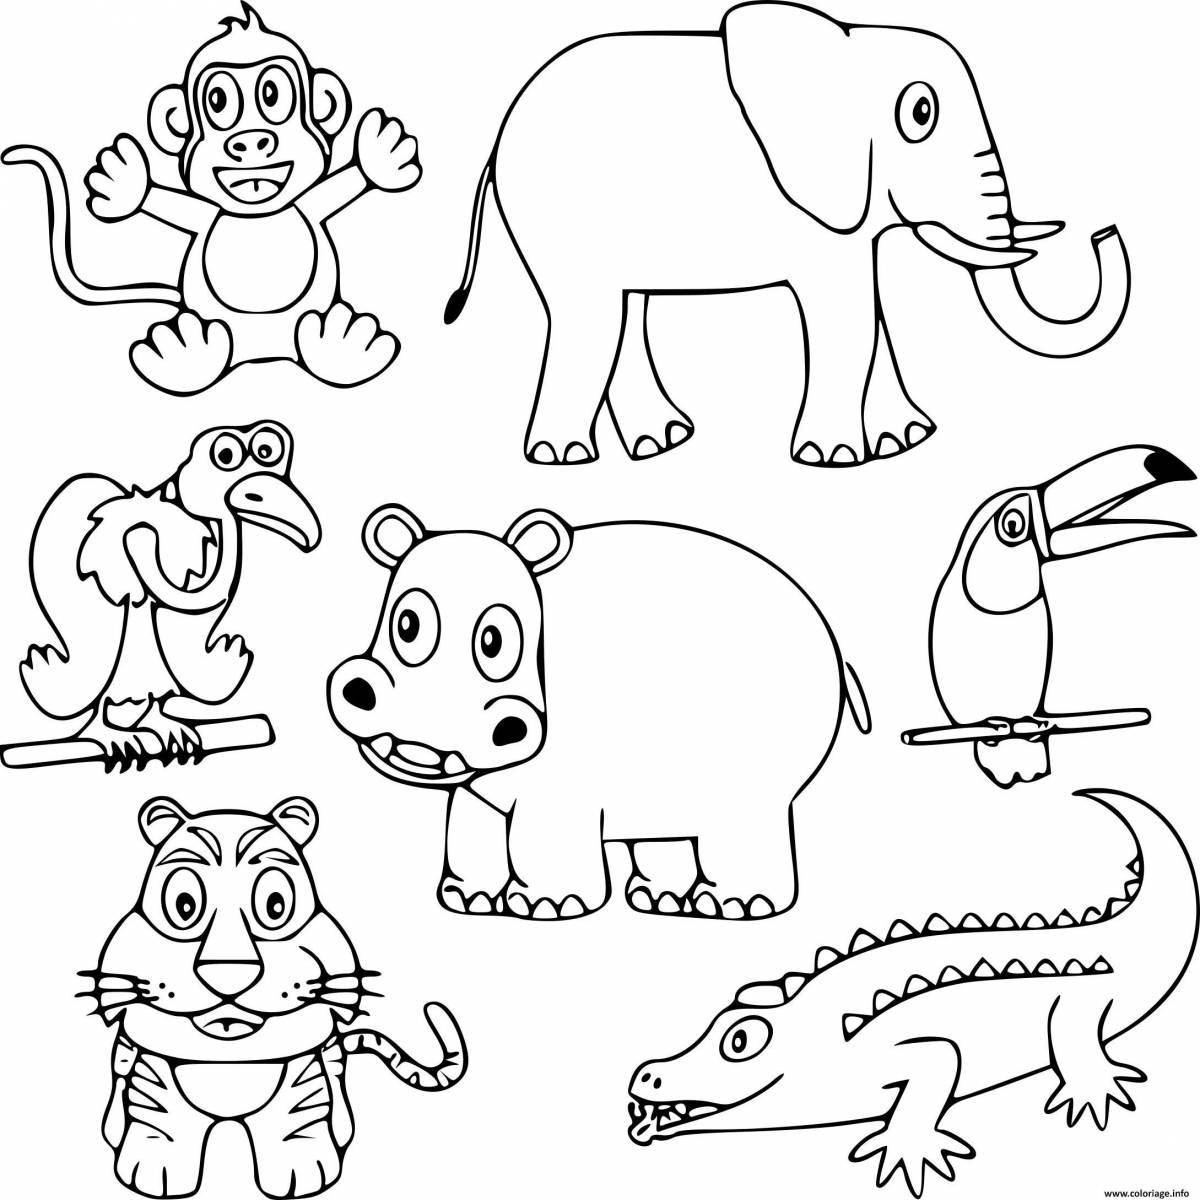 Incredible African Animal Coloring Book for 5-7 year olds